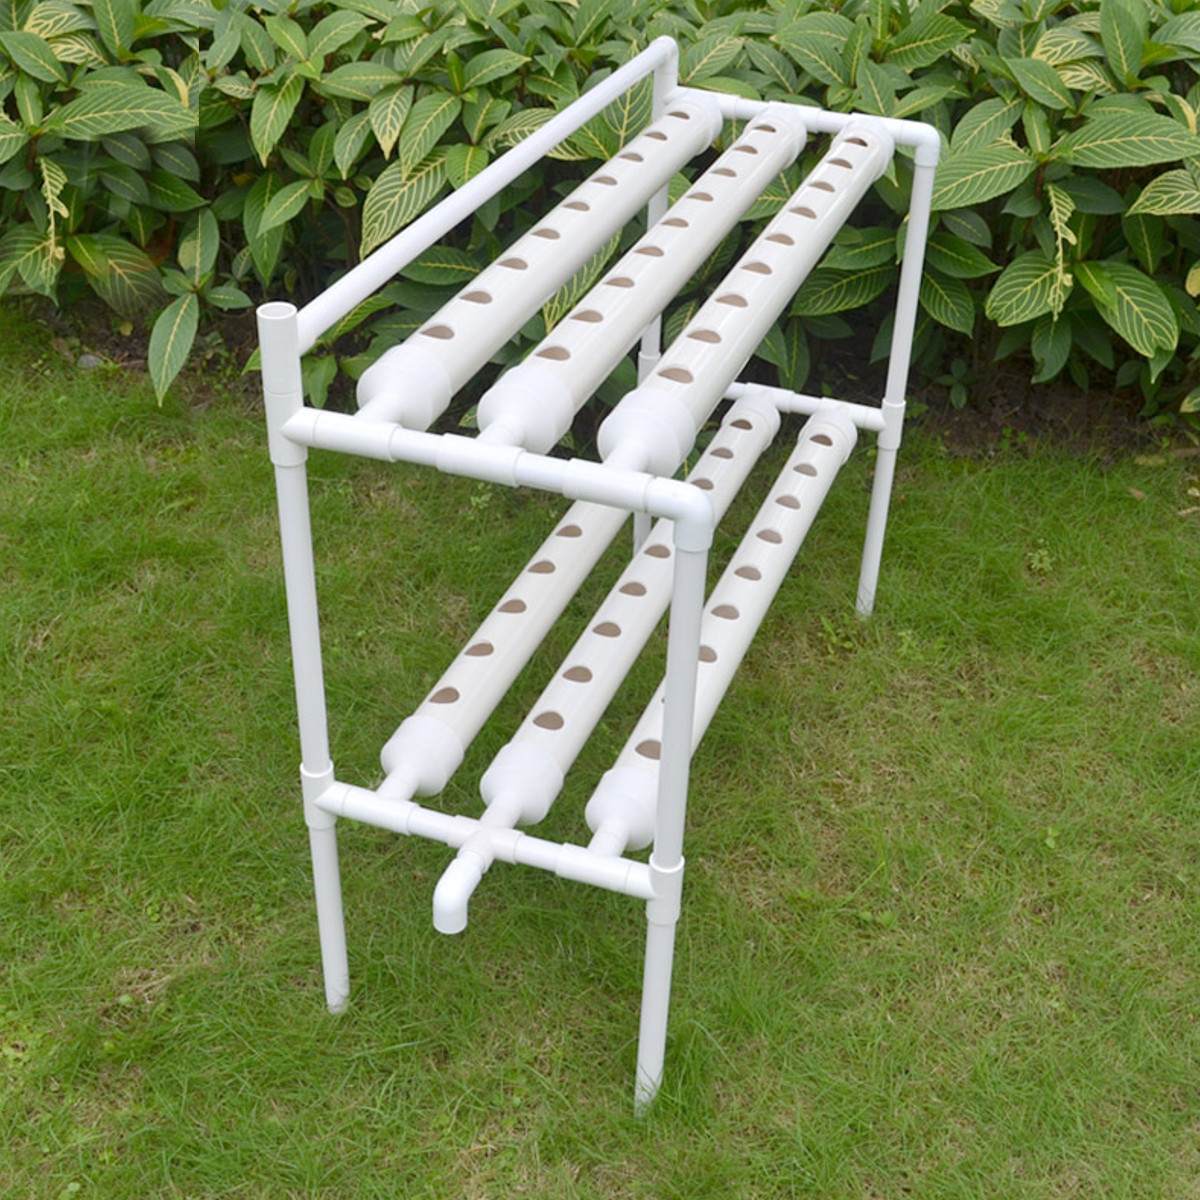 54 sites Plant Hydroponic Systems Grow Kit Nursery Pots Anti Pest Soilless Cultivation Indoor Garden Culture Planter Vegetables